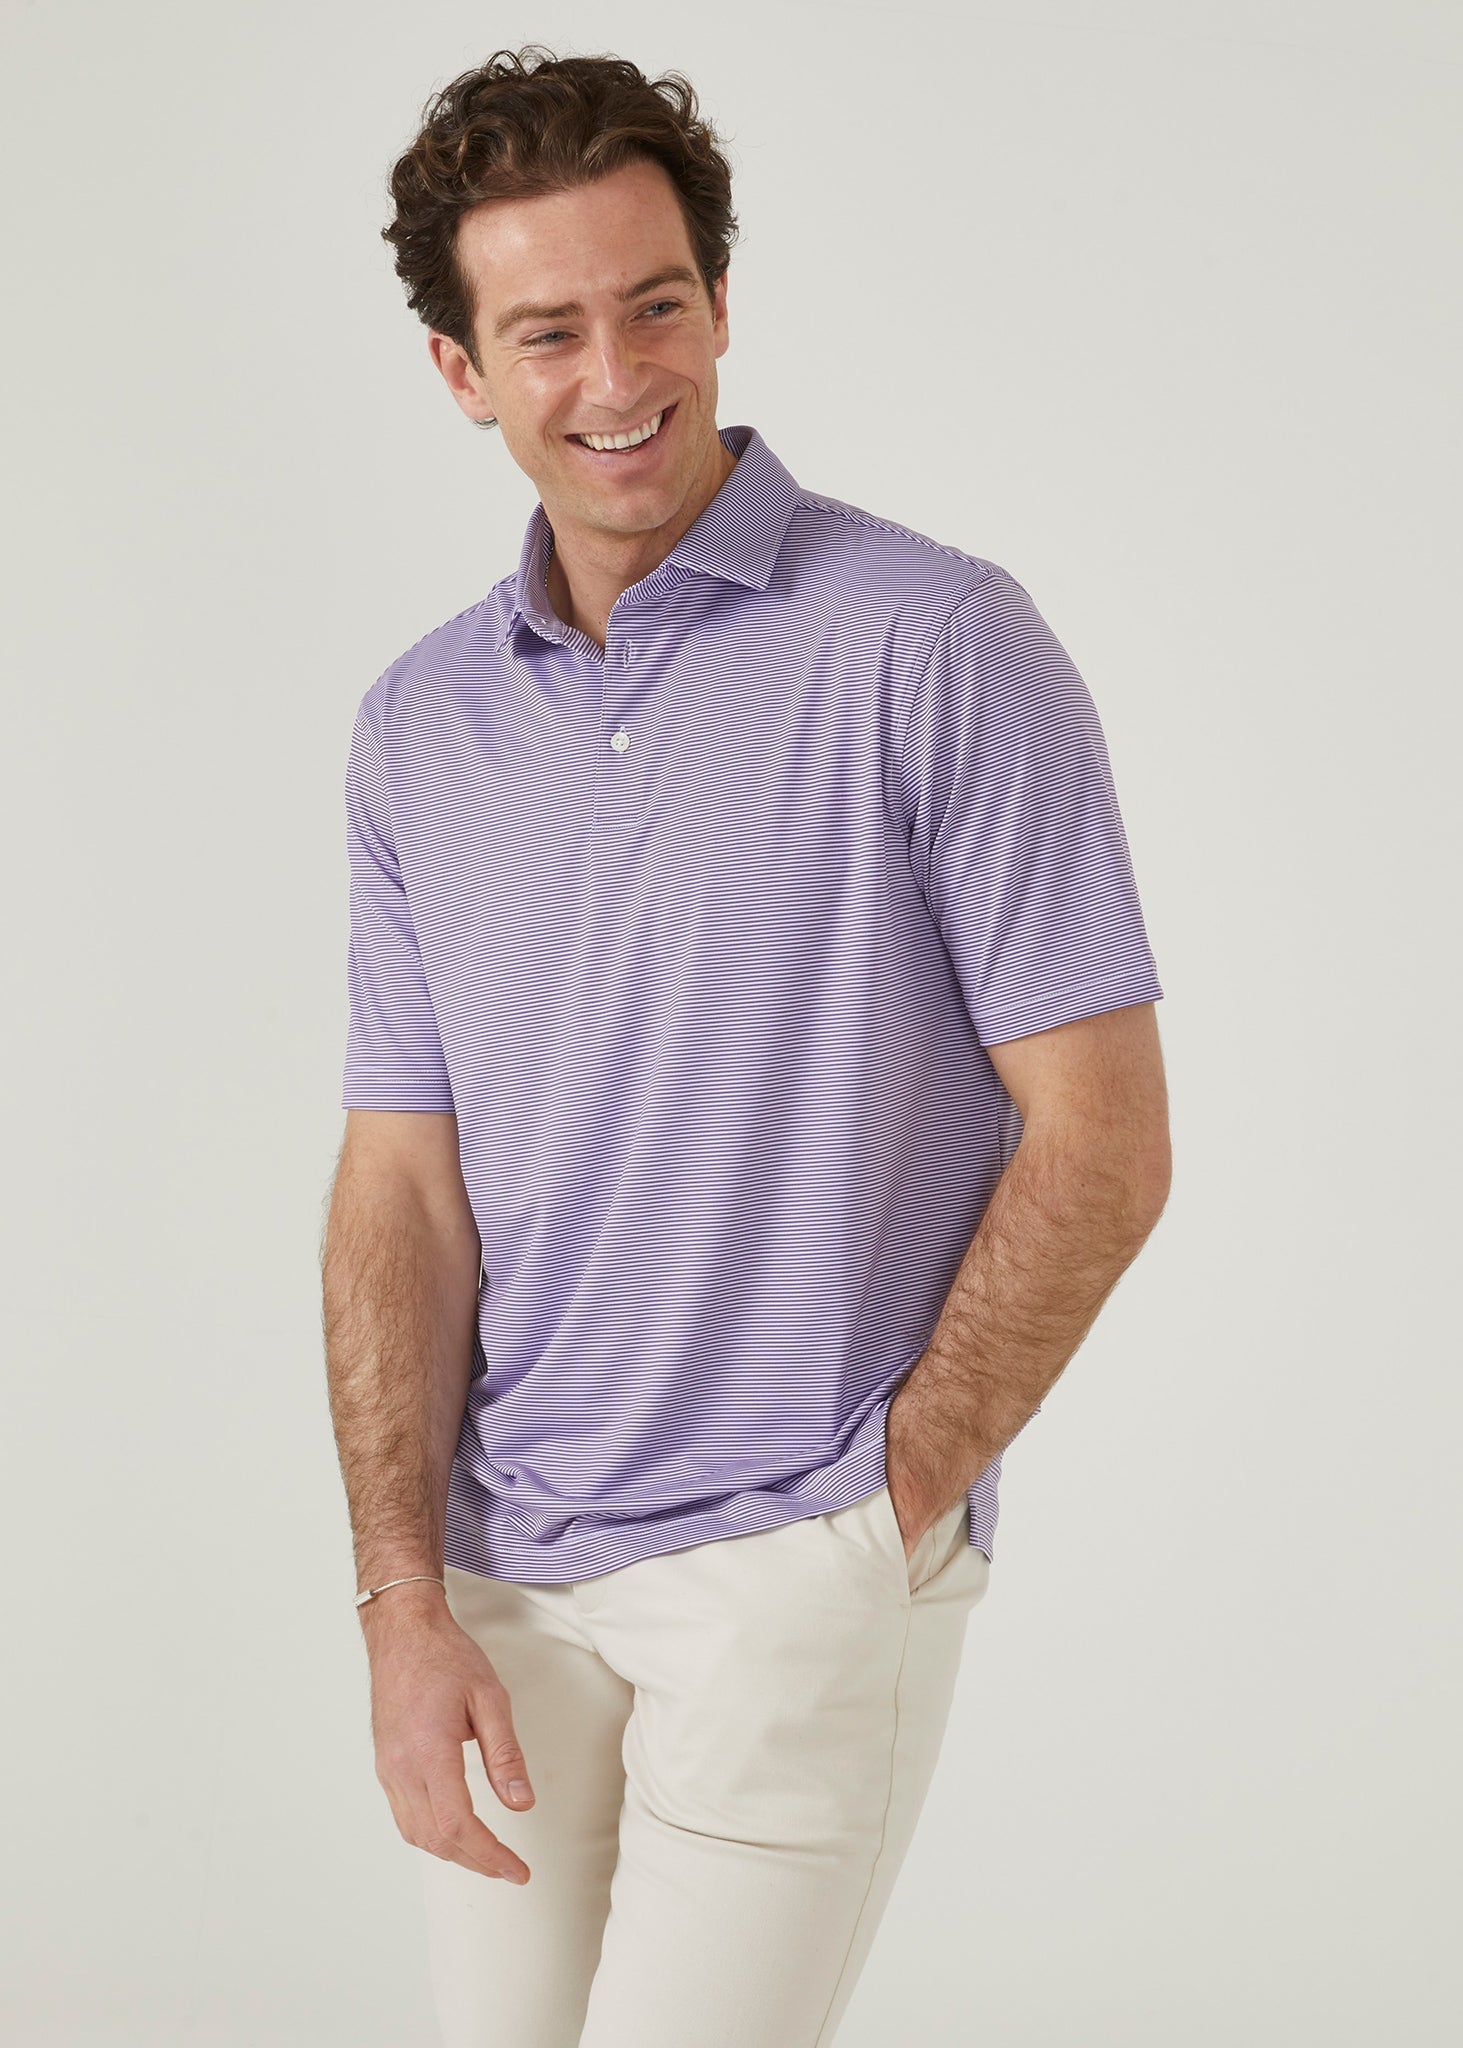 Polo shirt made from polyester with 3 button collar in plum with white stipes.